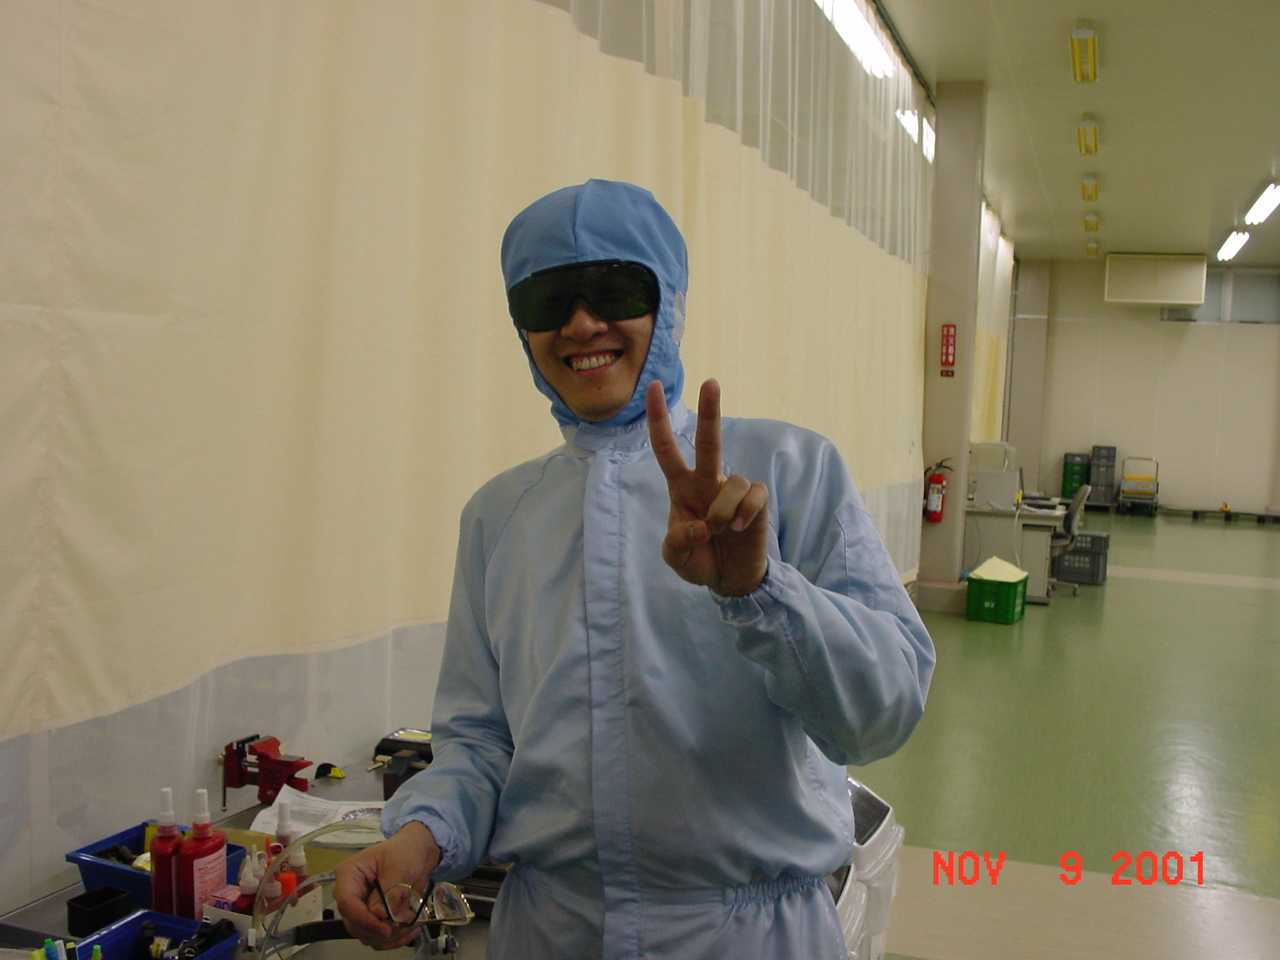 Ultra cool photo of me in a cleanroom suit